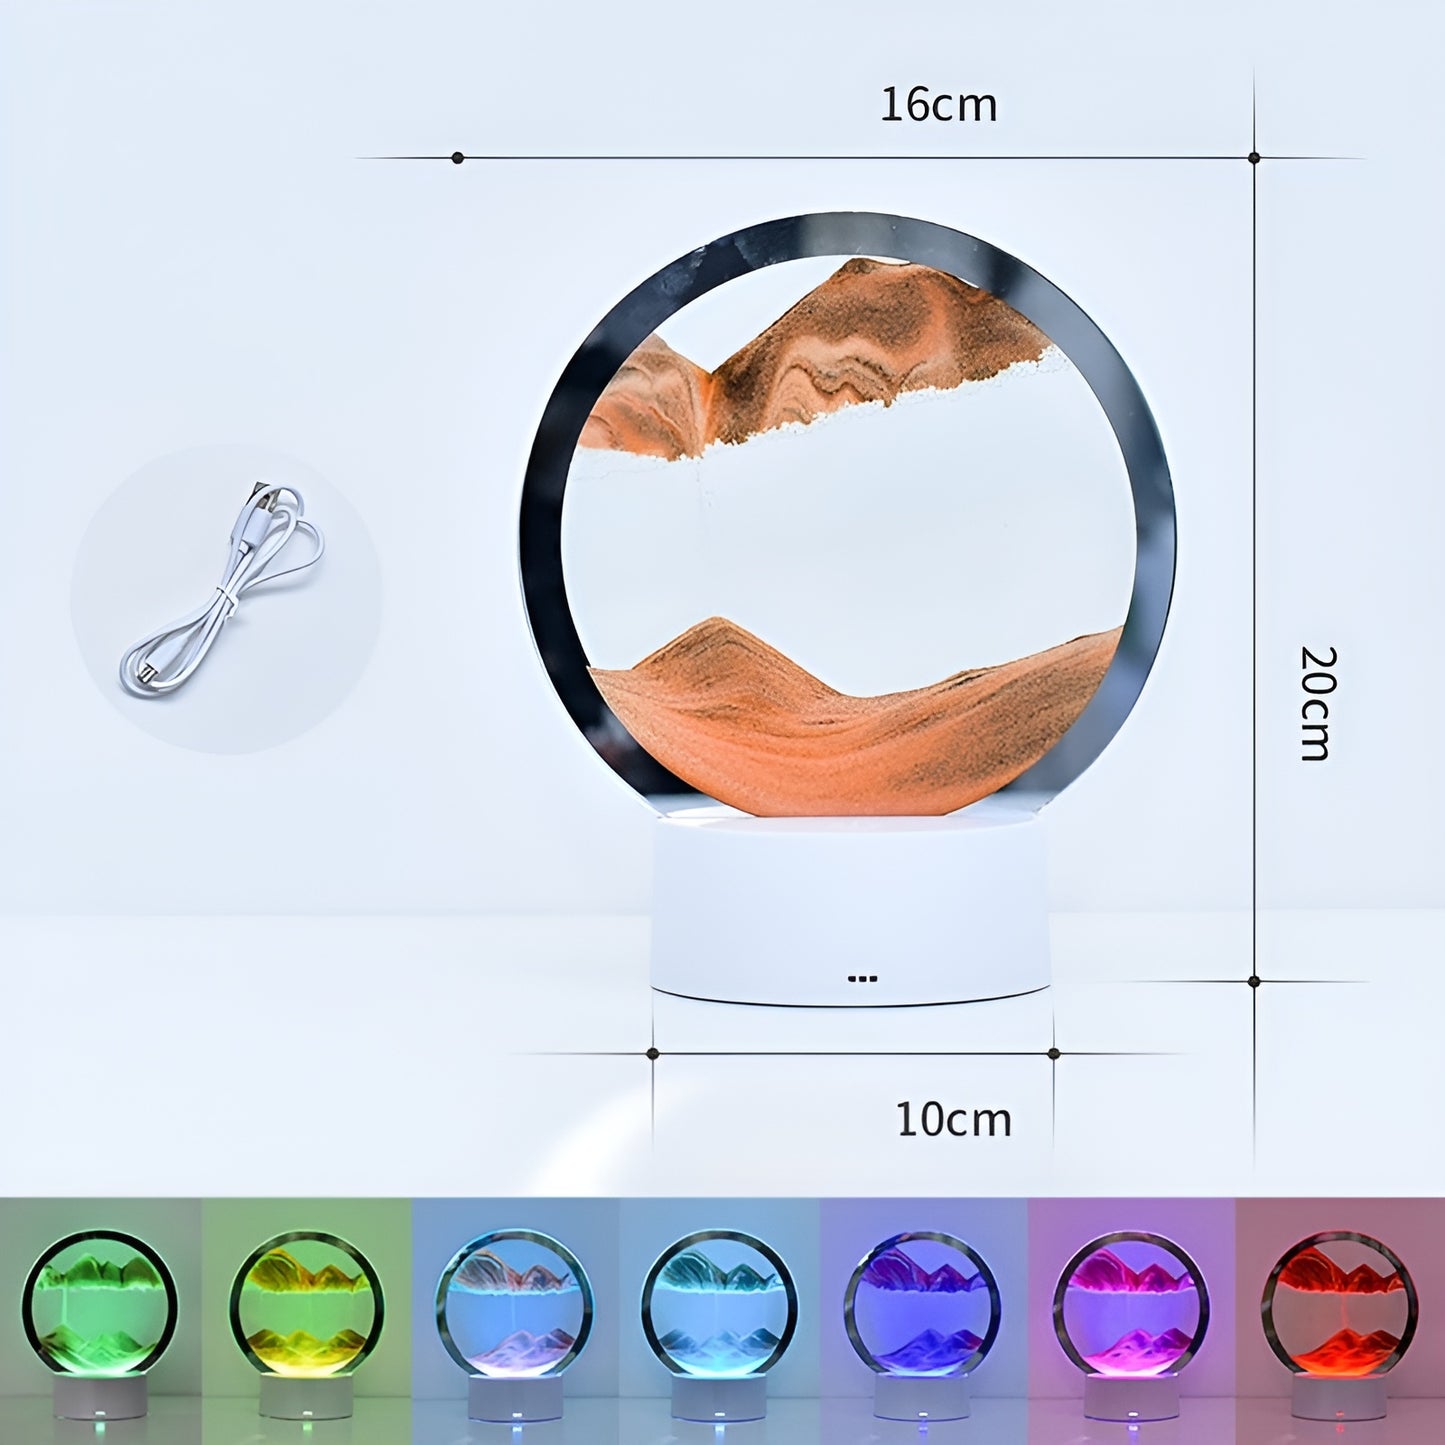 LITLAMP™ - 3D Moving Sand Table Lamp